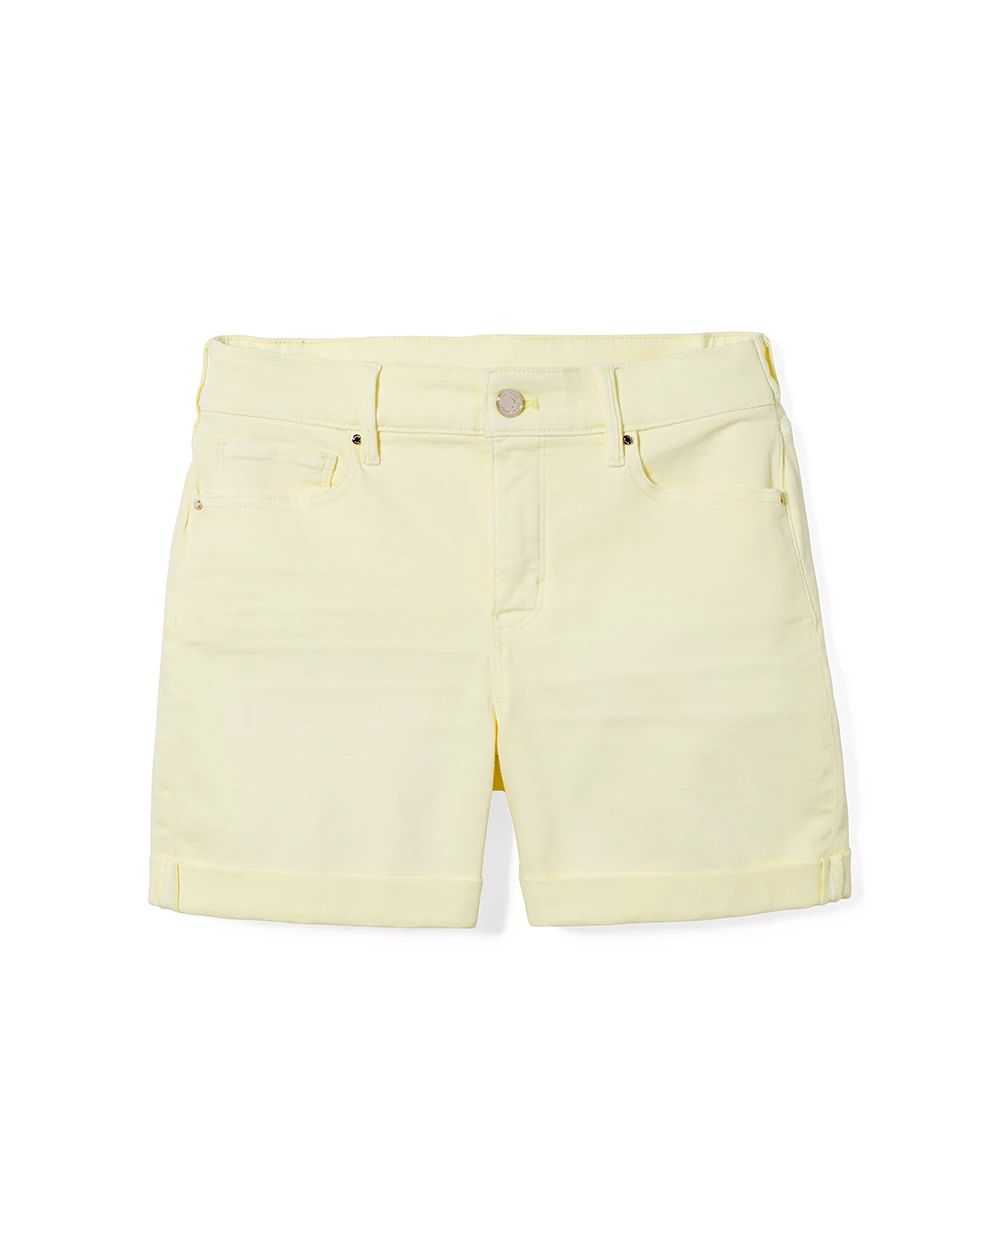 High-Rise Tinted Wash 5-Inch Shorts click to view larger image.